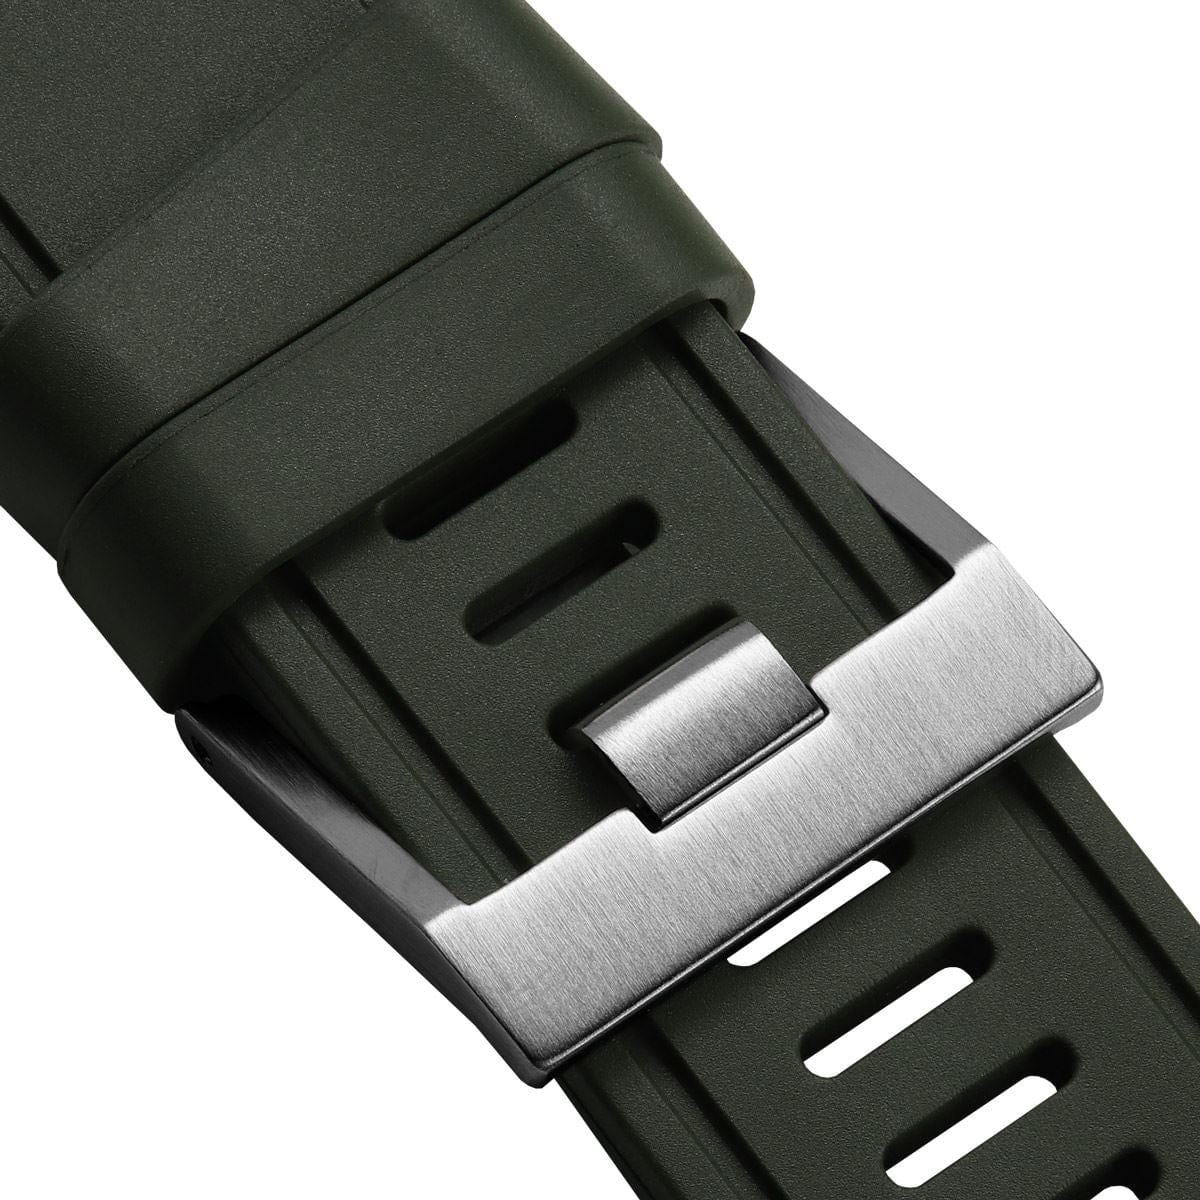 ISOfrane Rubber Strap with RS Buckle - Green